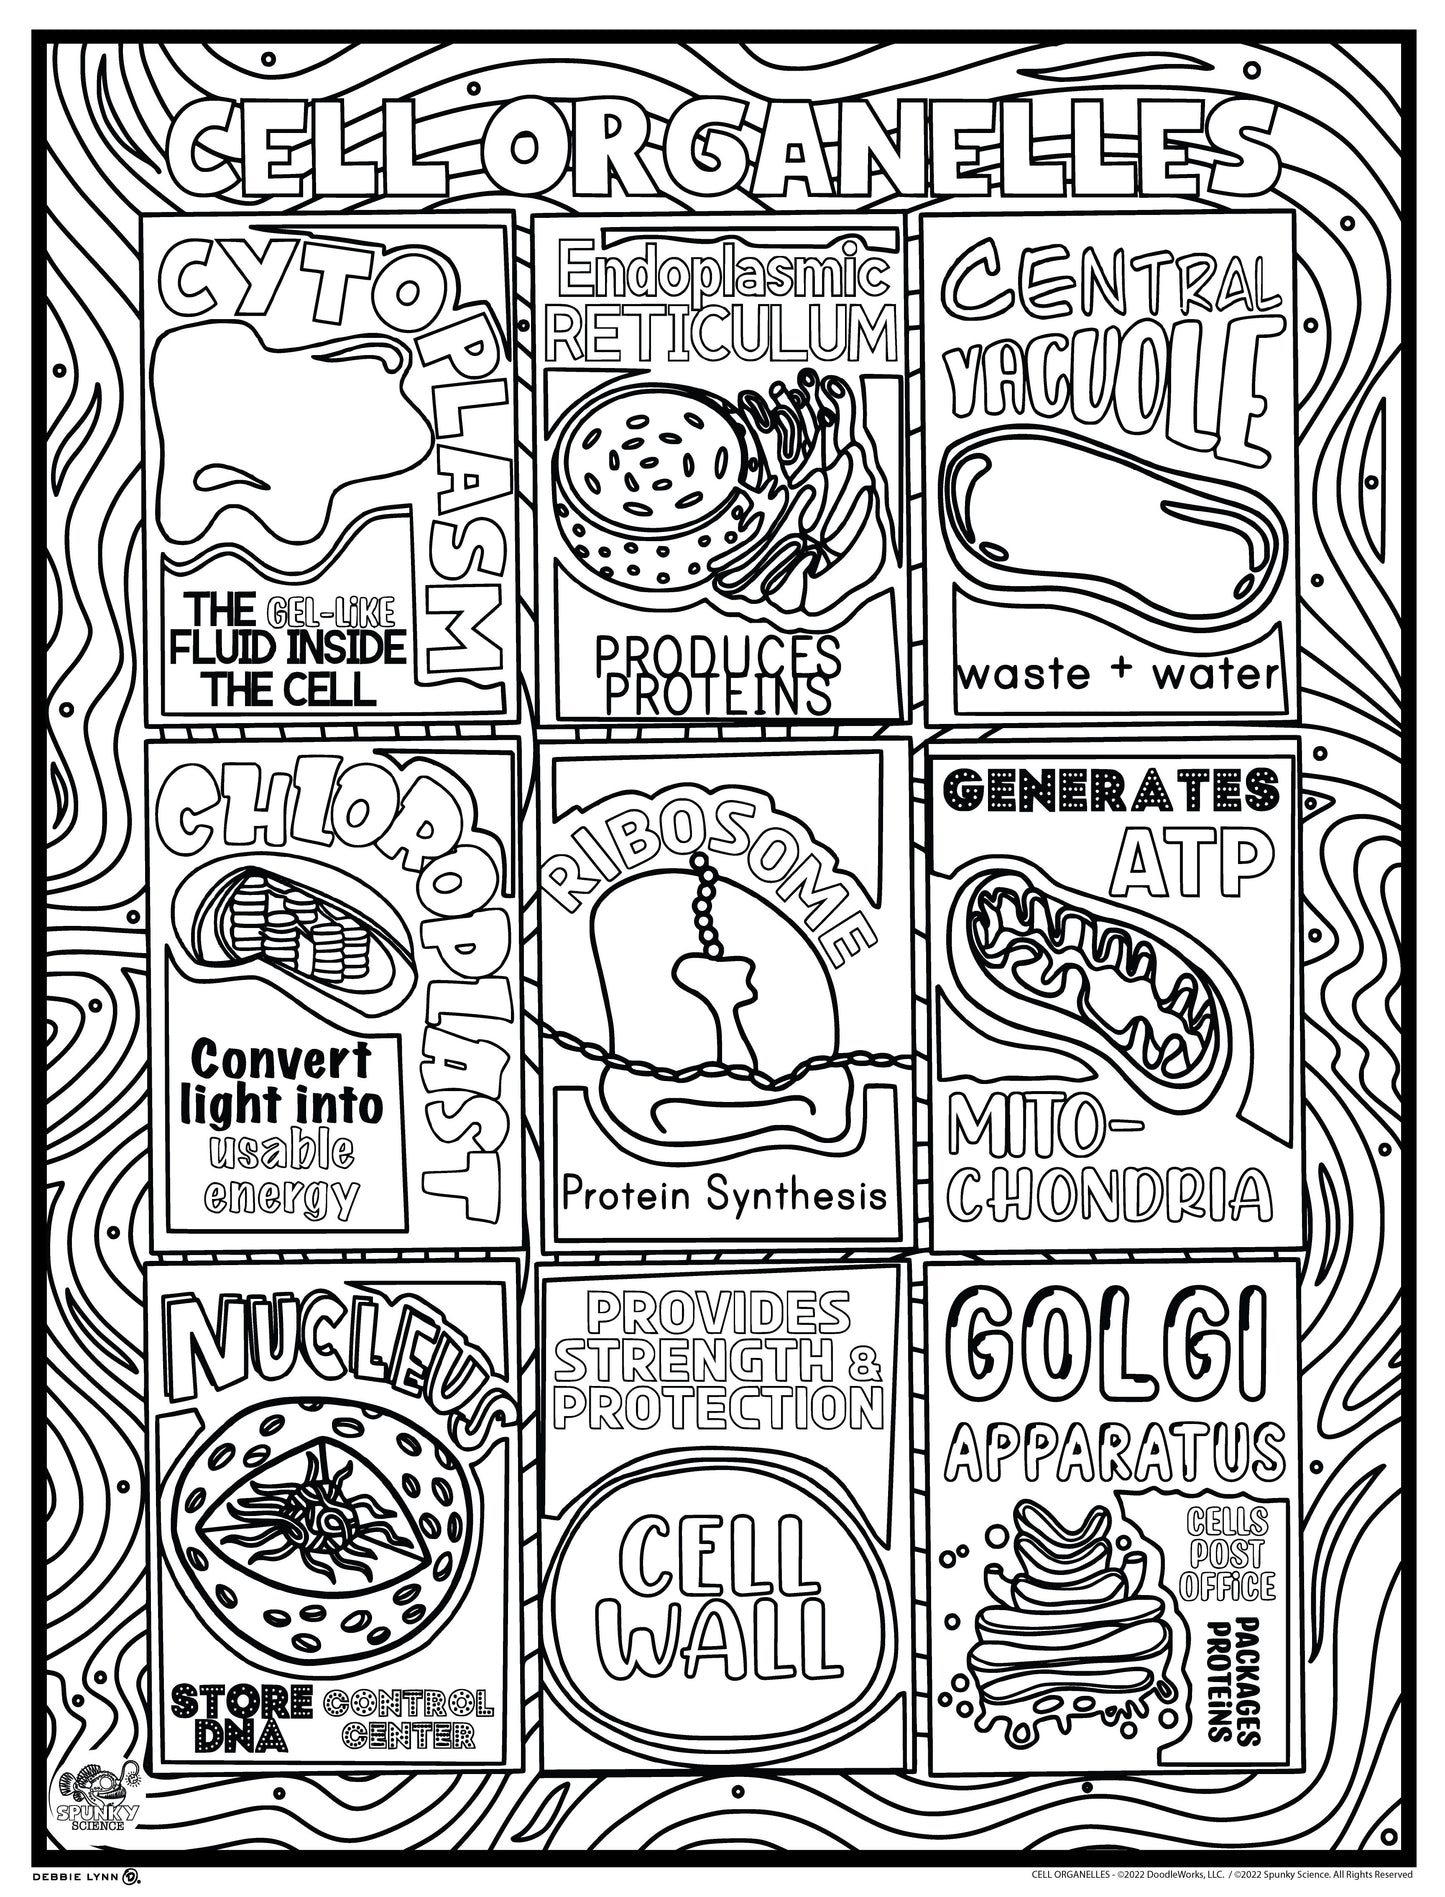 Cell Organelles Spunky Science Personalized Giant Coloring Poster 46"x60"